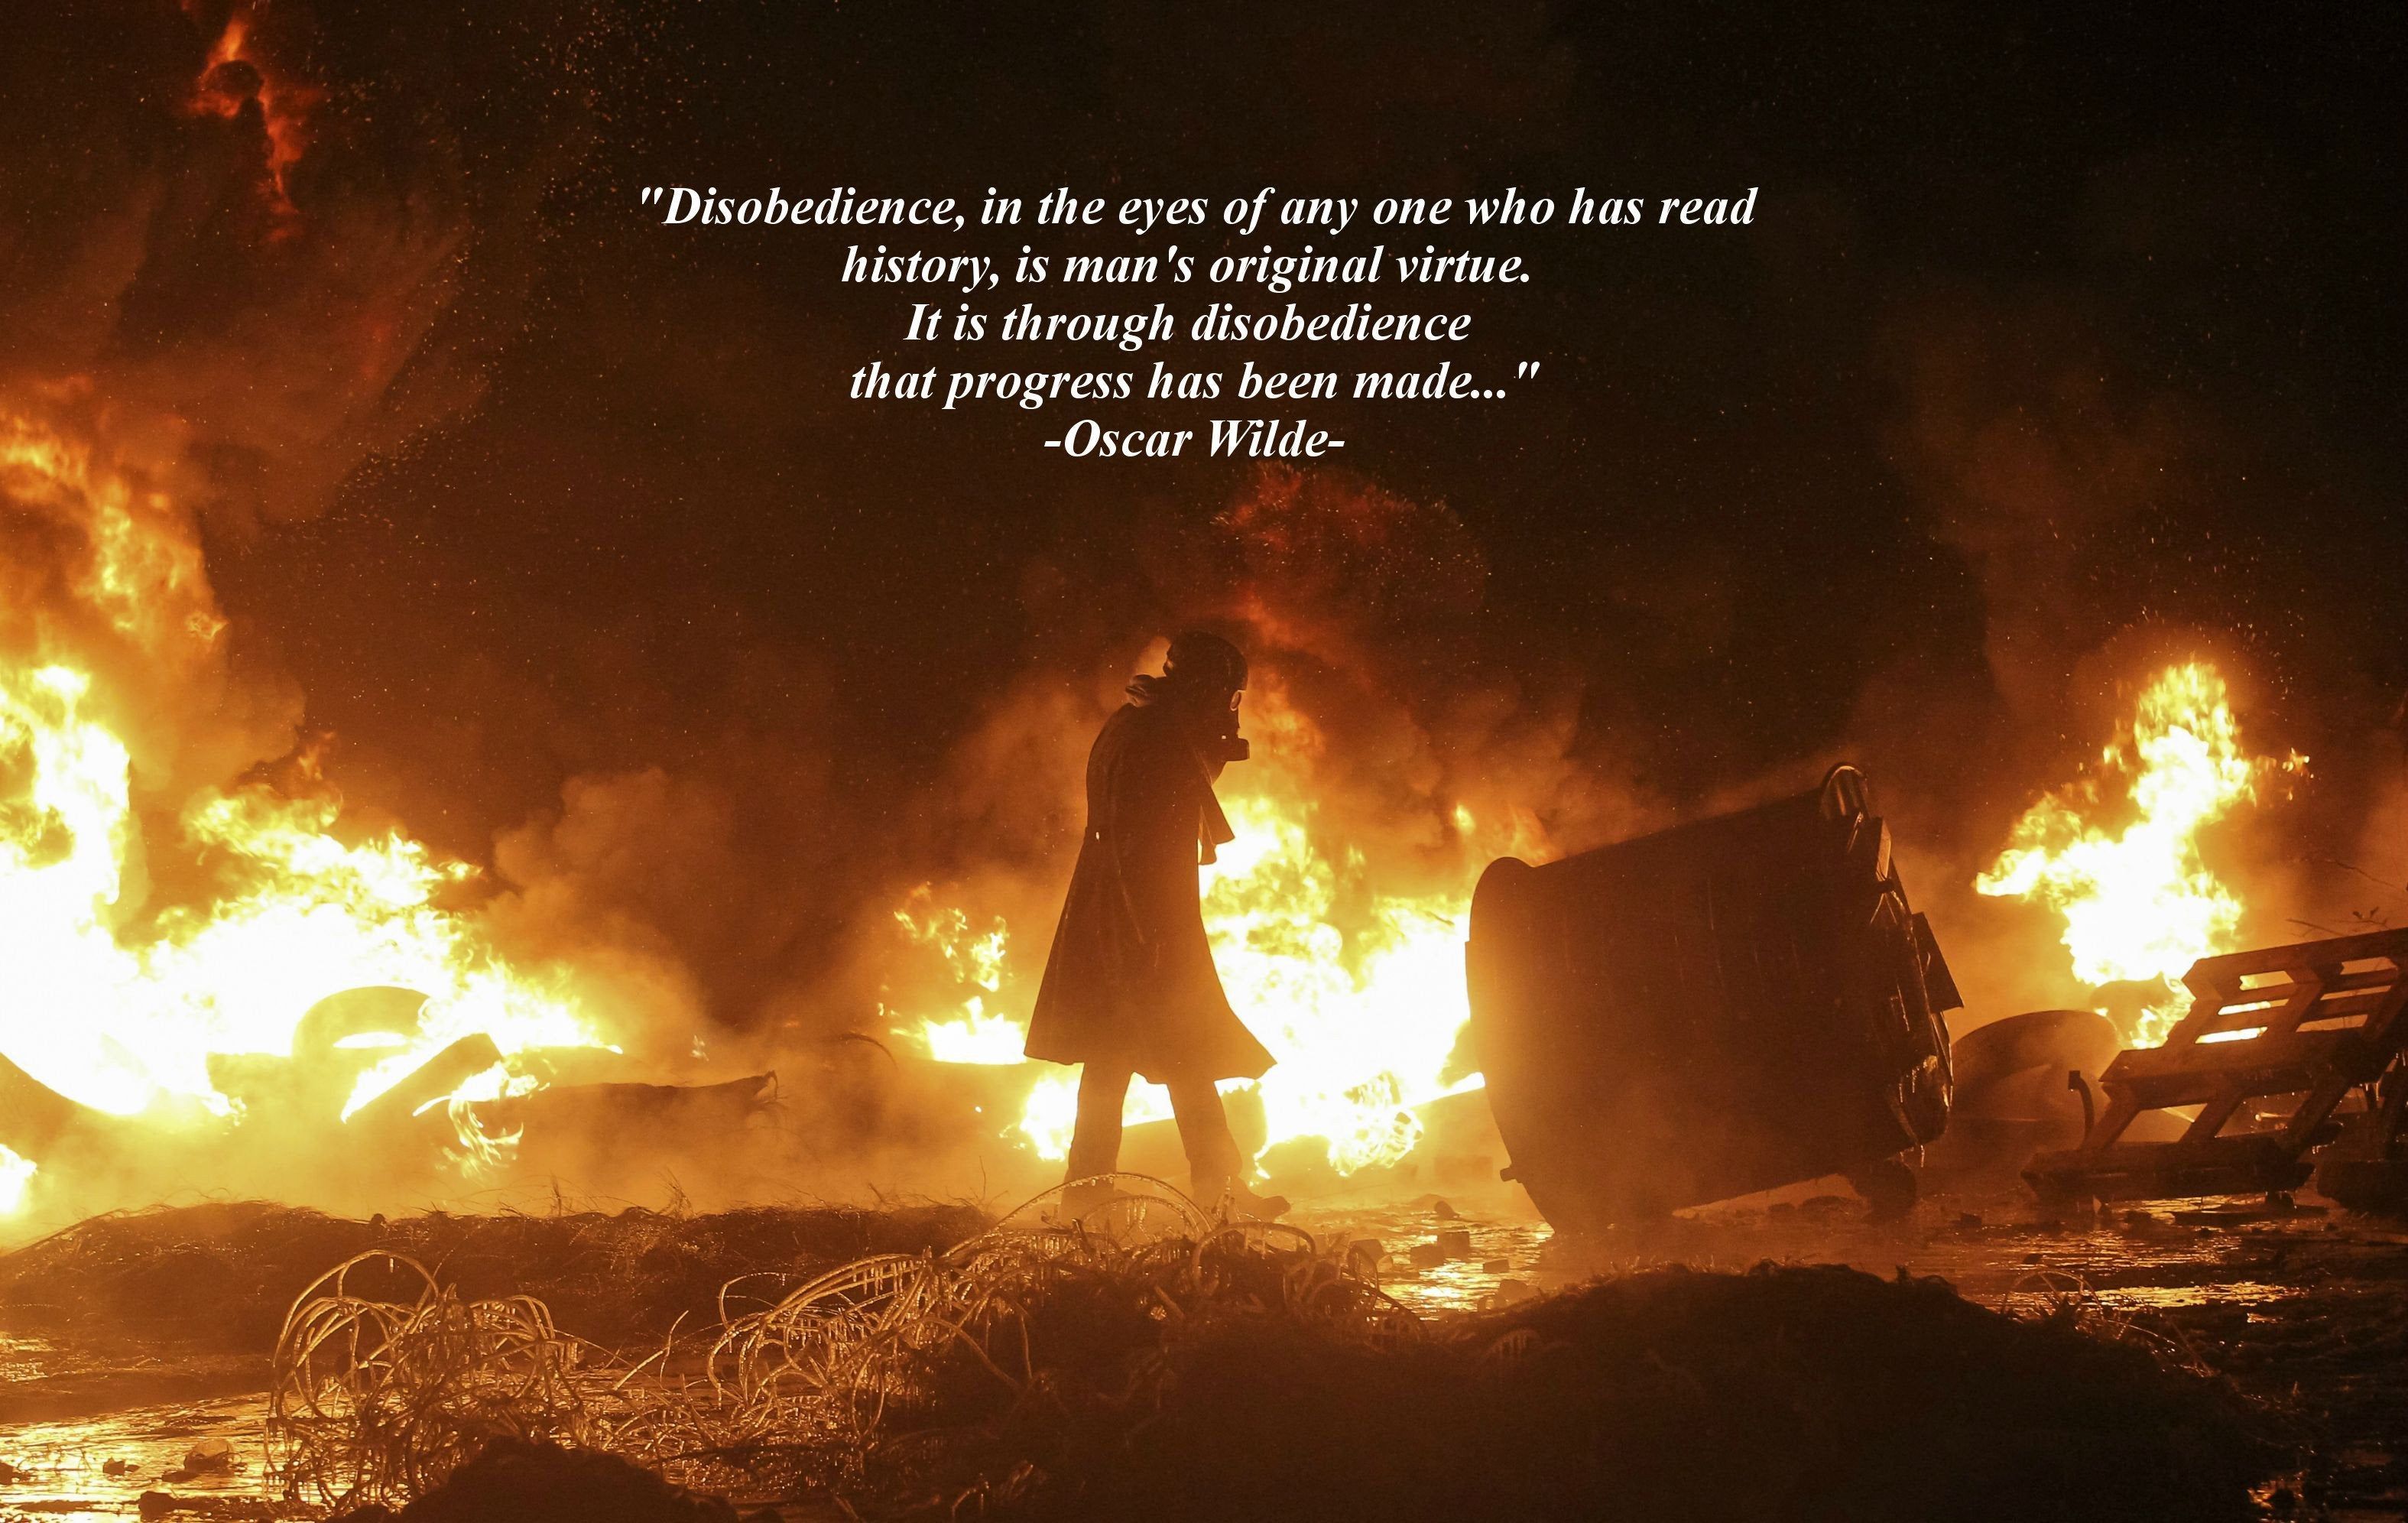 My favorite picture from the Kiev riots, and an Oscar Wilde quote